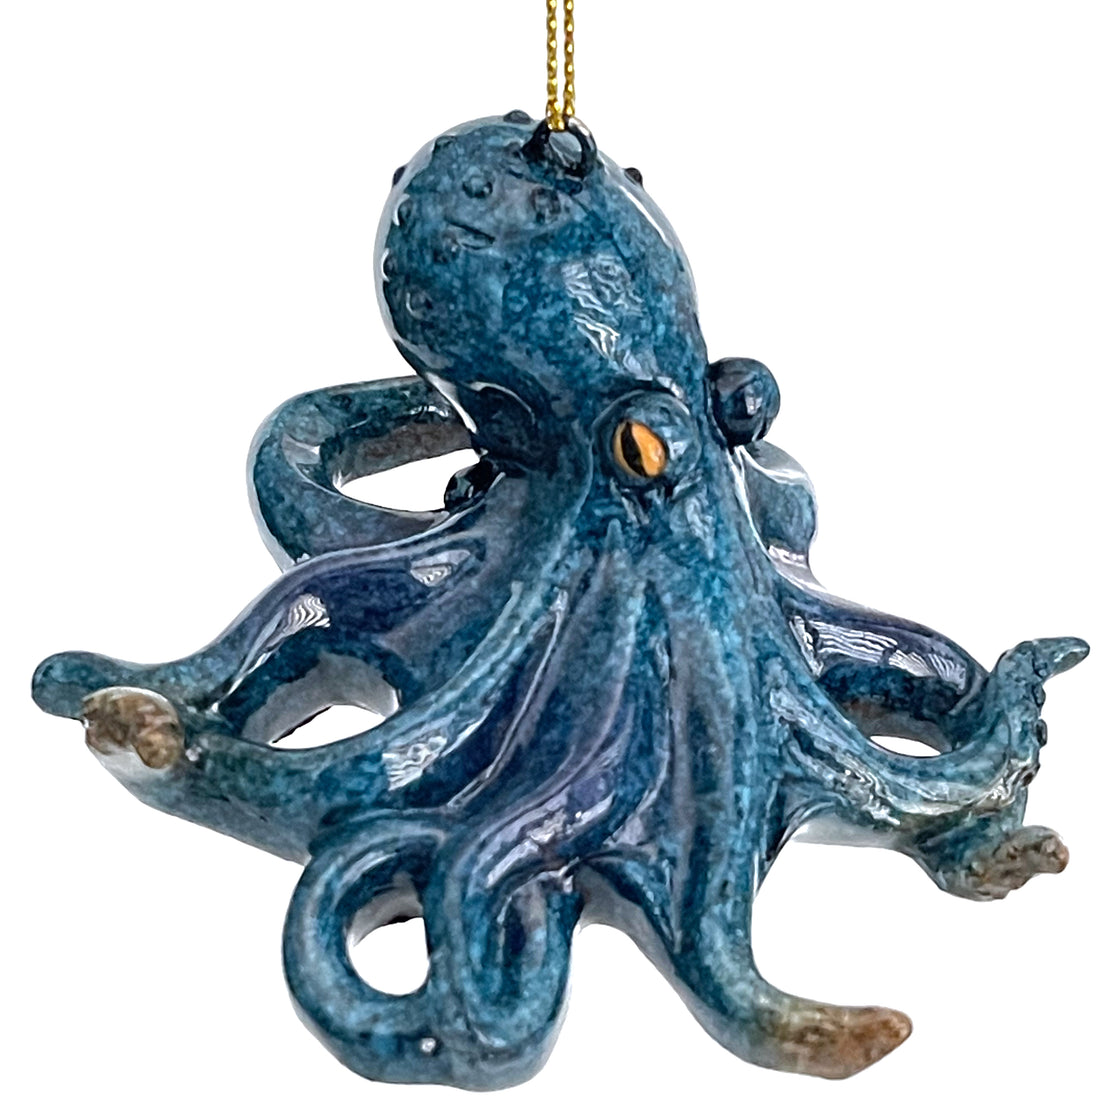 The intricate bluish octopus design from rengora resembles a lifelike octopus suspended against a clean white backdrop